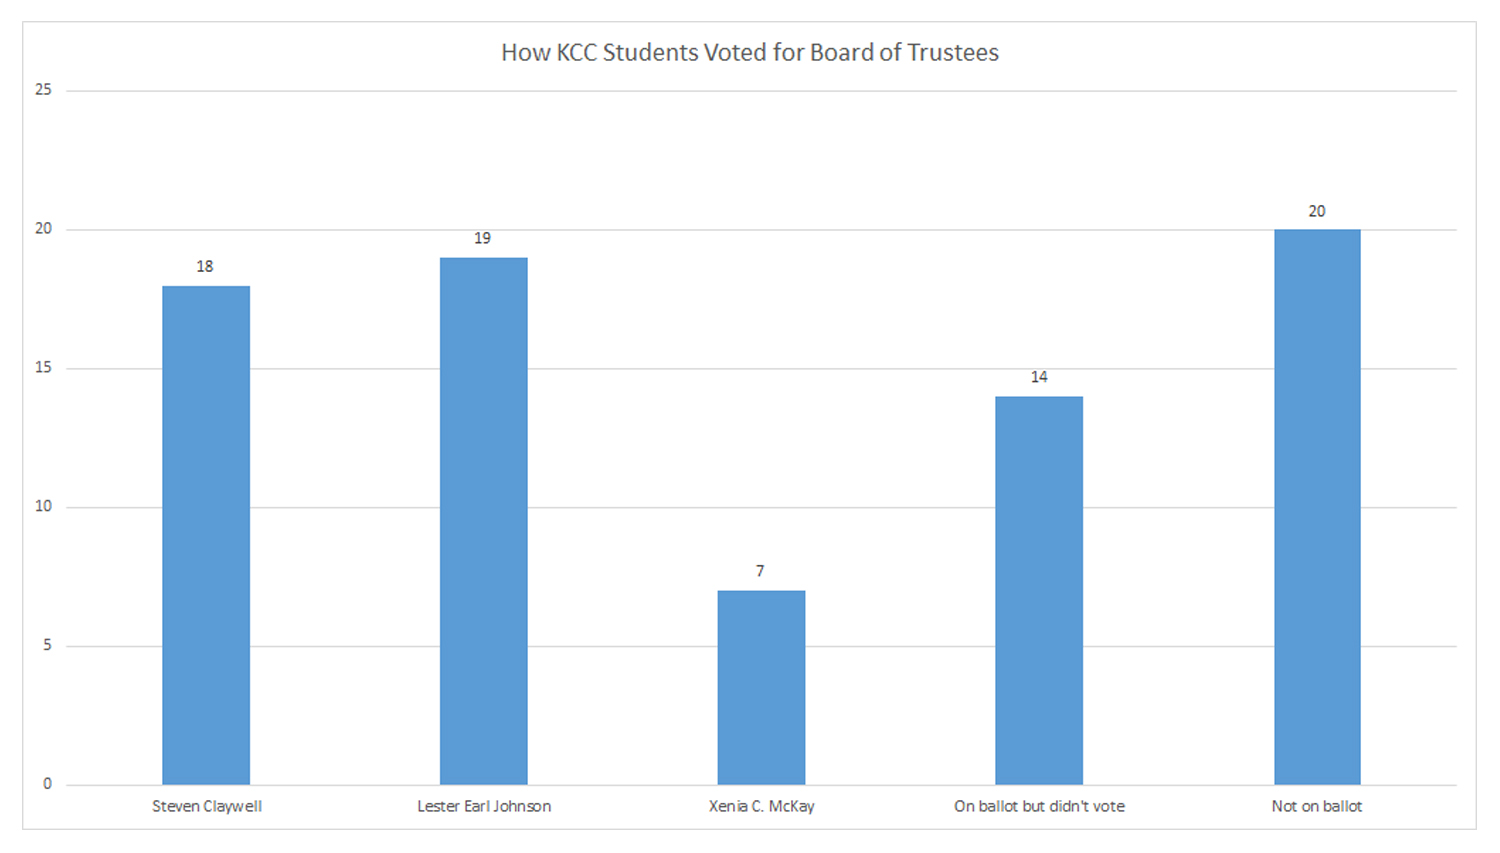 A chart showing survey results indicating how KCC students voted for KCC Board of Trustees Candidates in the Nov. 6, 2018, election. Most said it wasn't on their ballot, while Lester Earl Johnson had the most votes, Steven Claywell had the second most, and Xenia McKay had the next most votes. More than a quarter of respondents indicated it was on their ballot but they didn't vote. 